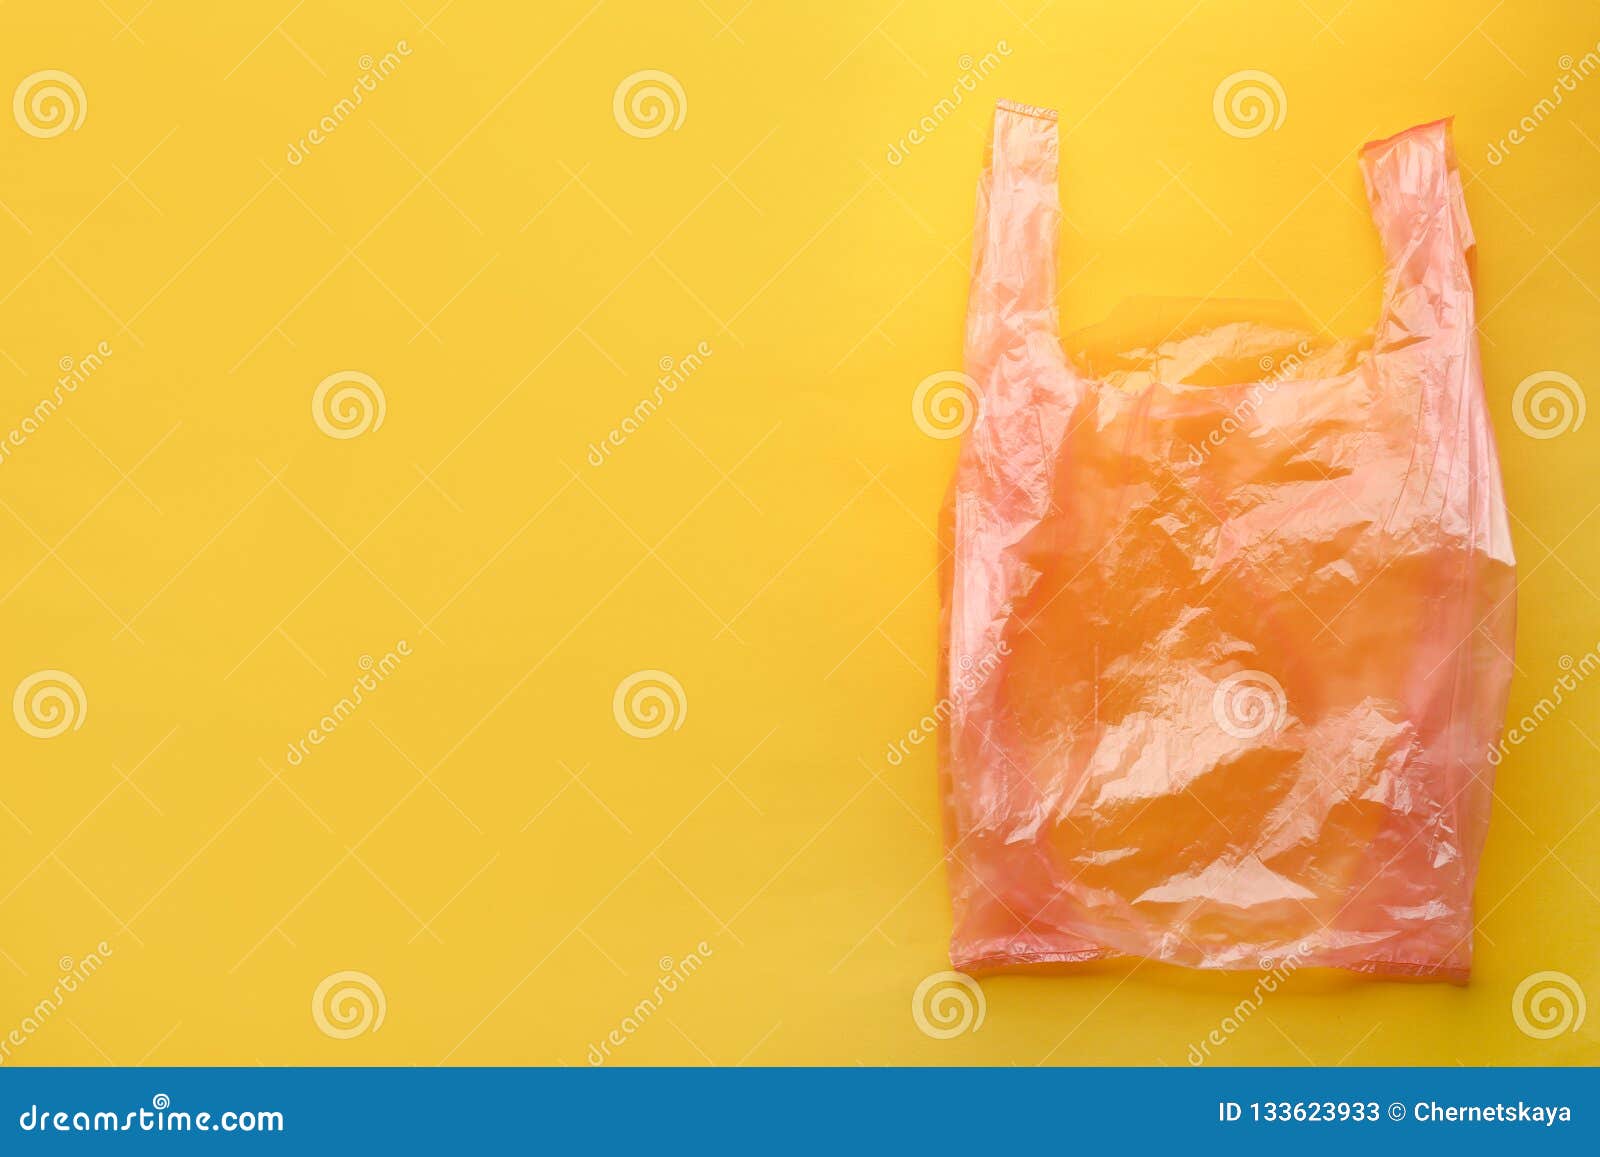 Clear Disposable Plastic Bag On Color Background. Stock